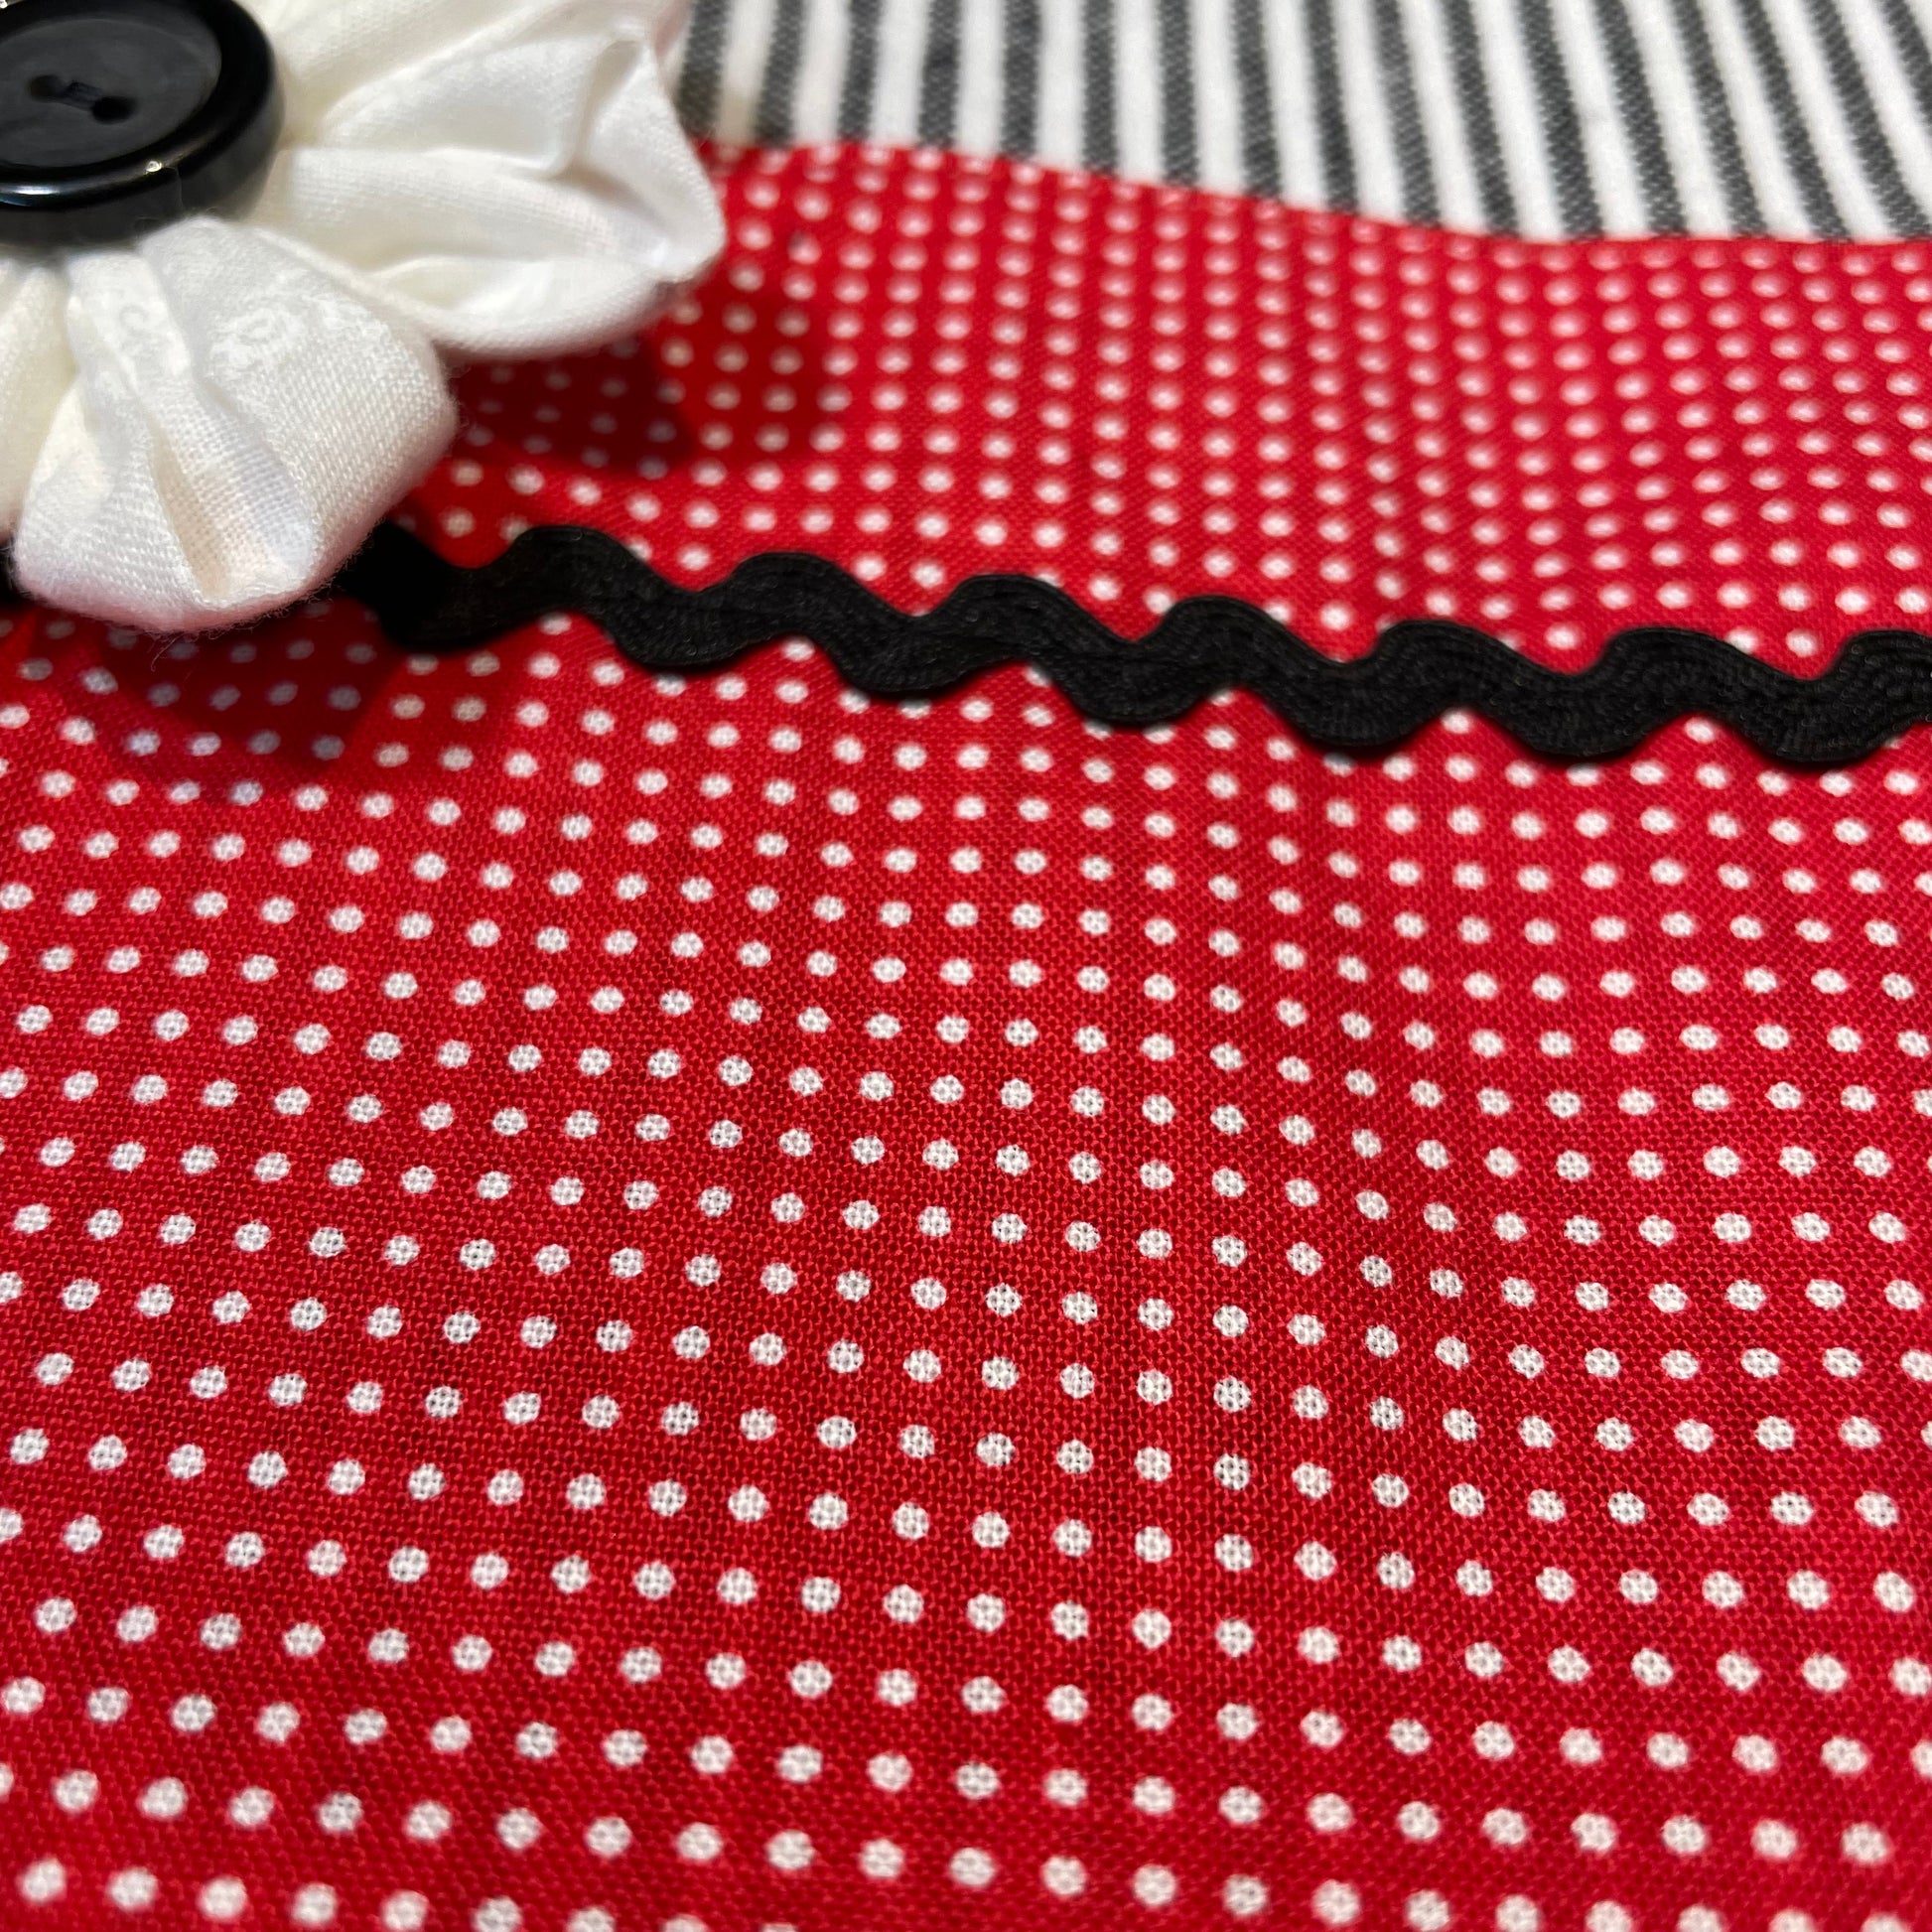 Red, white and black dish towel. With ric rac and hand stitched flower with button center. Farmhouse styled dish towels. This is a mix and match collection. Head over to the website to find all your favorite farmhouse fabulous decor for your entire home. Be sure to follow along on the Home Stitchery Decor YouTube Channel for more farmhouse fun!